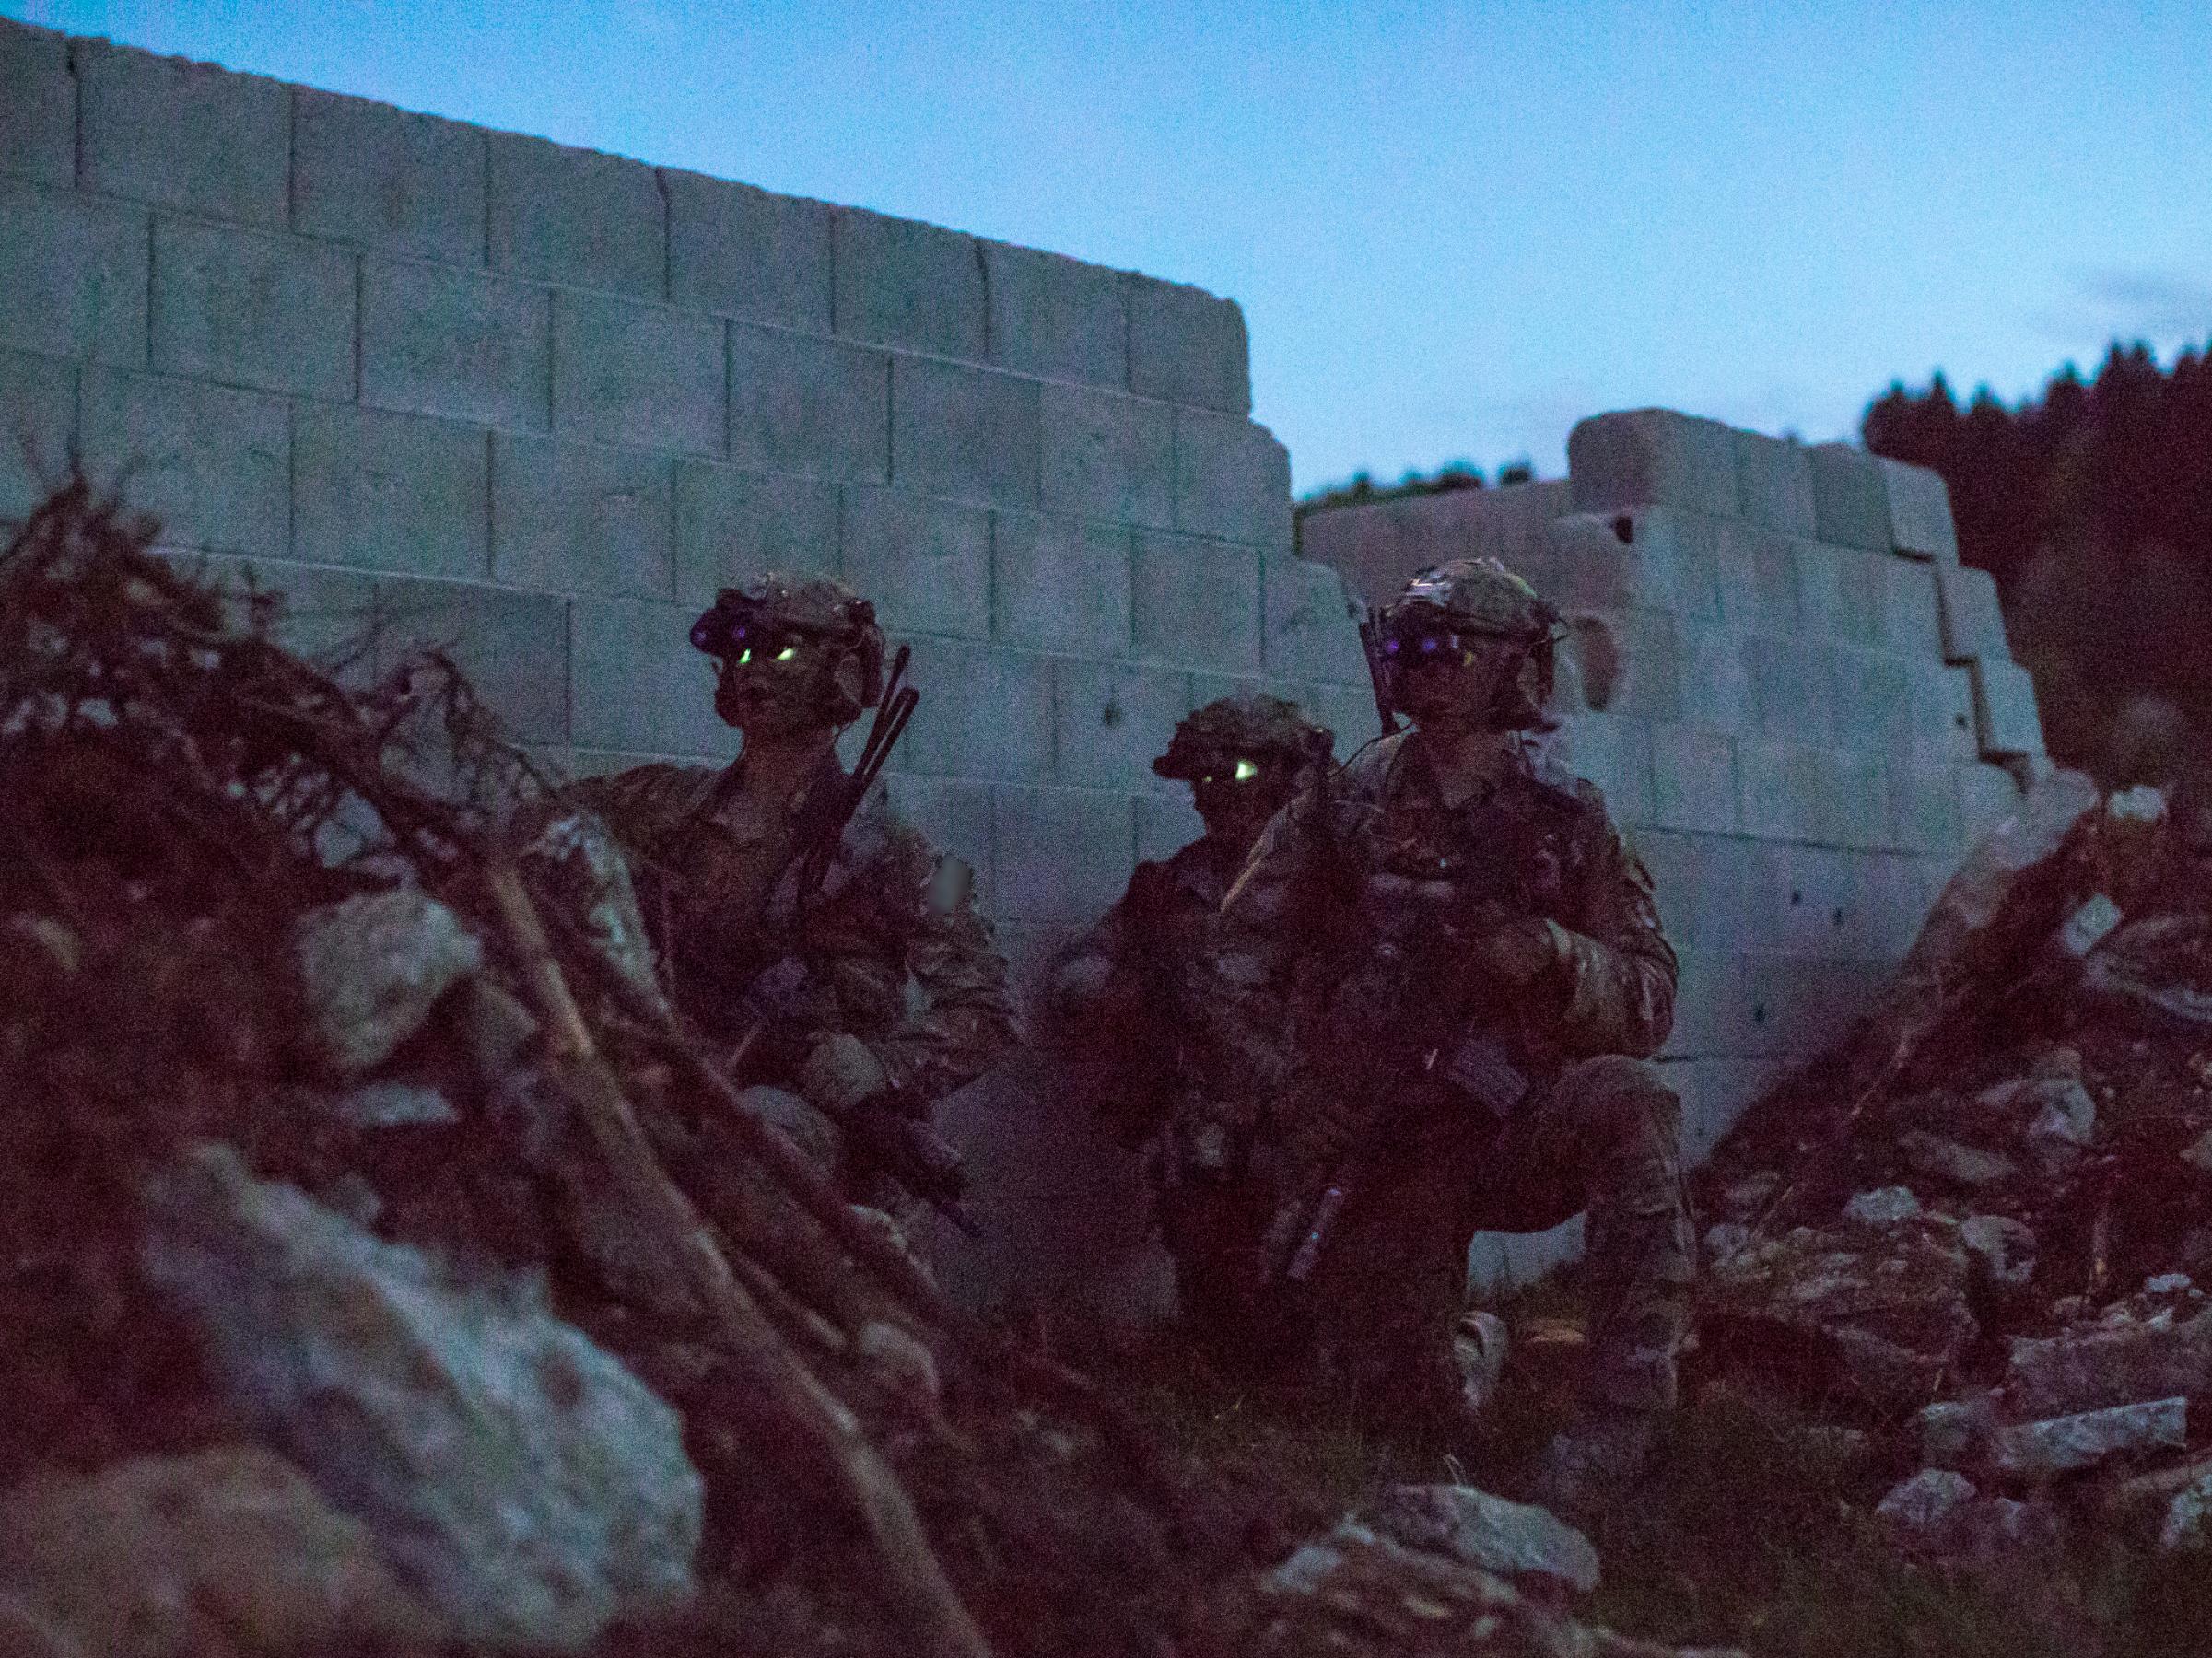 U.S. Army Rangers assigned to the 75th Ranger Regiment take cover behind piles of rubble while on a raid during the Joint Warfighter Assessment at the Joint Multinational Readiness Center in Hohenfels, Germany, April 25, 2018. The Joint Warfighter Assessment helps the Army evaluate emerging concepts, integrate new technologies, and promote interoperability of the U.S. and partner nations. (U.S. Army photo by 1st Lt. Benjamin Haulenbeek)